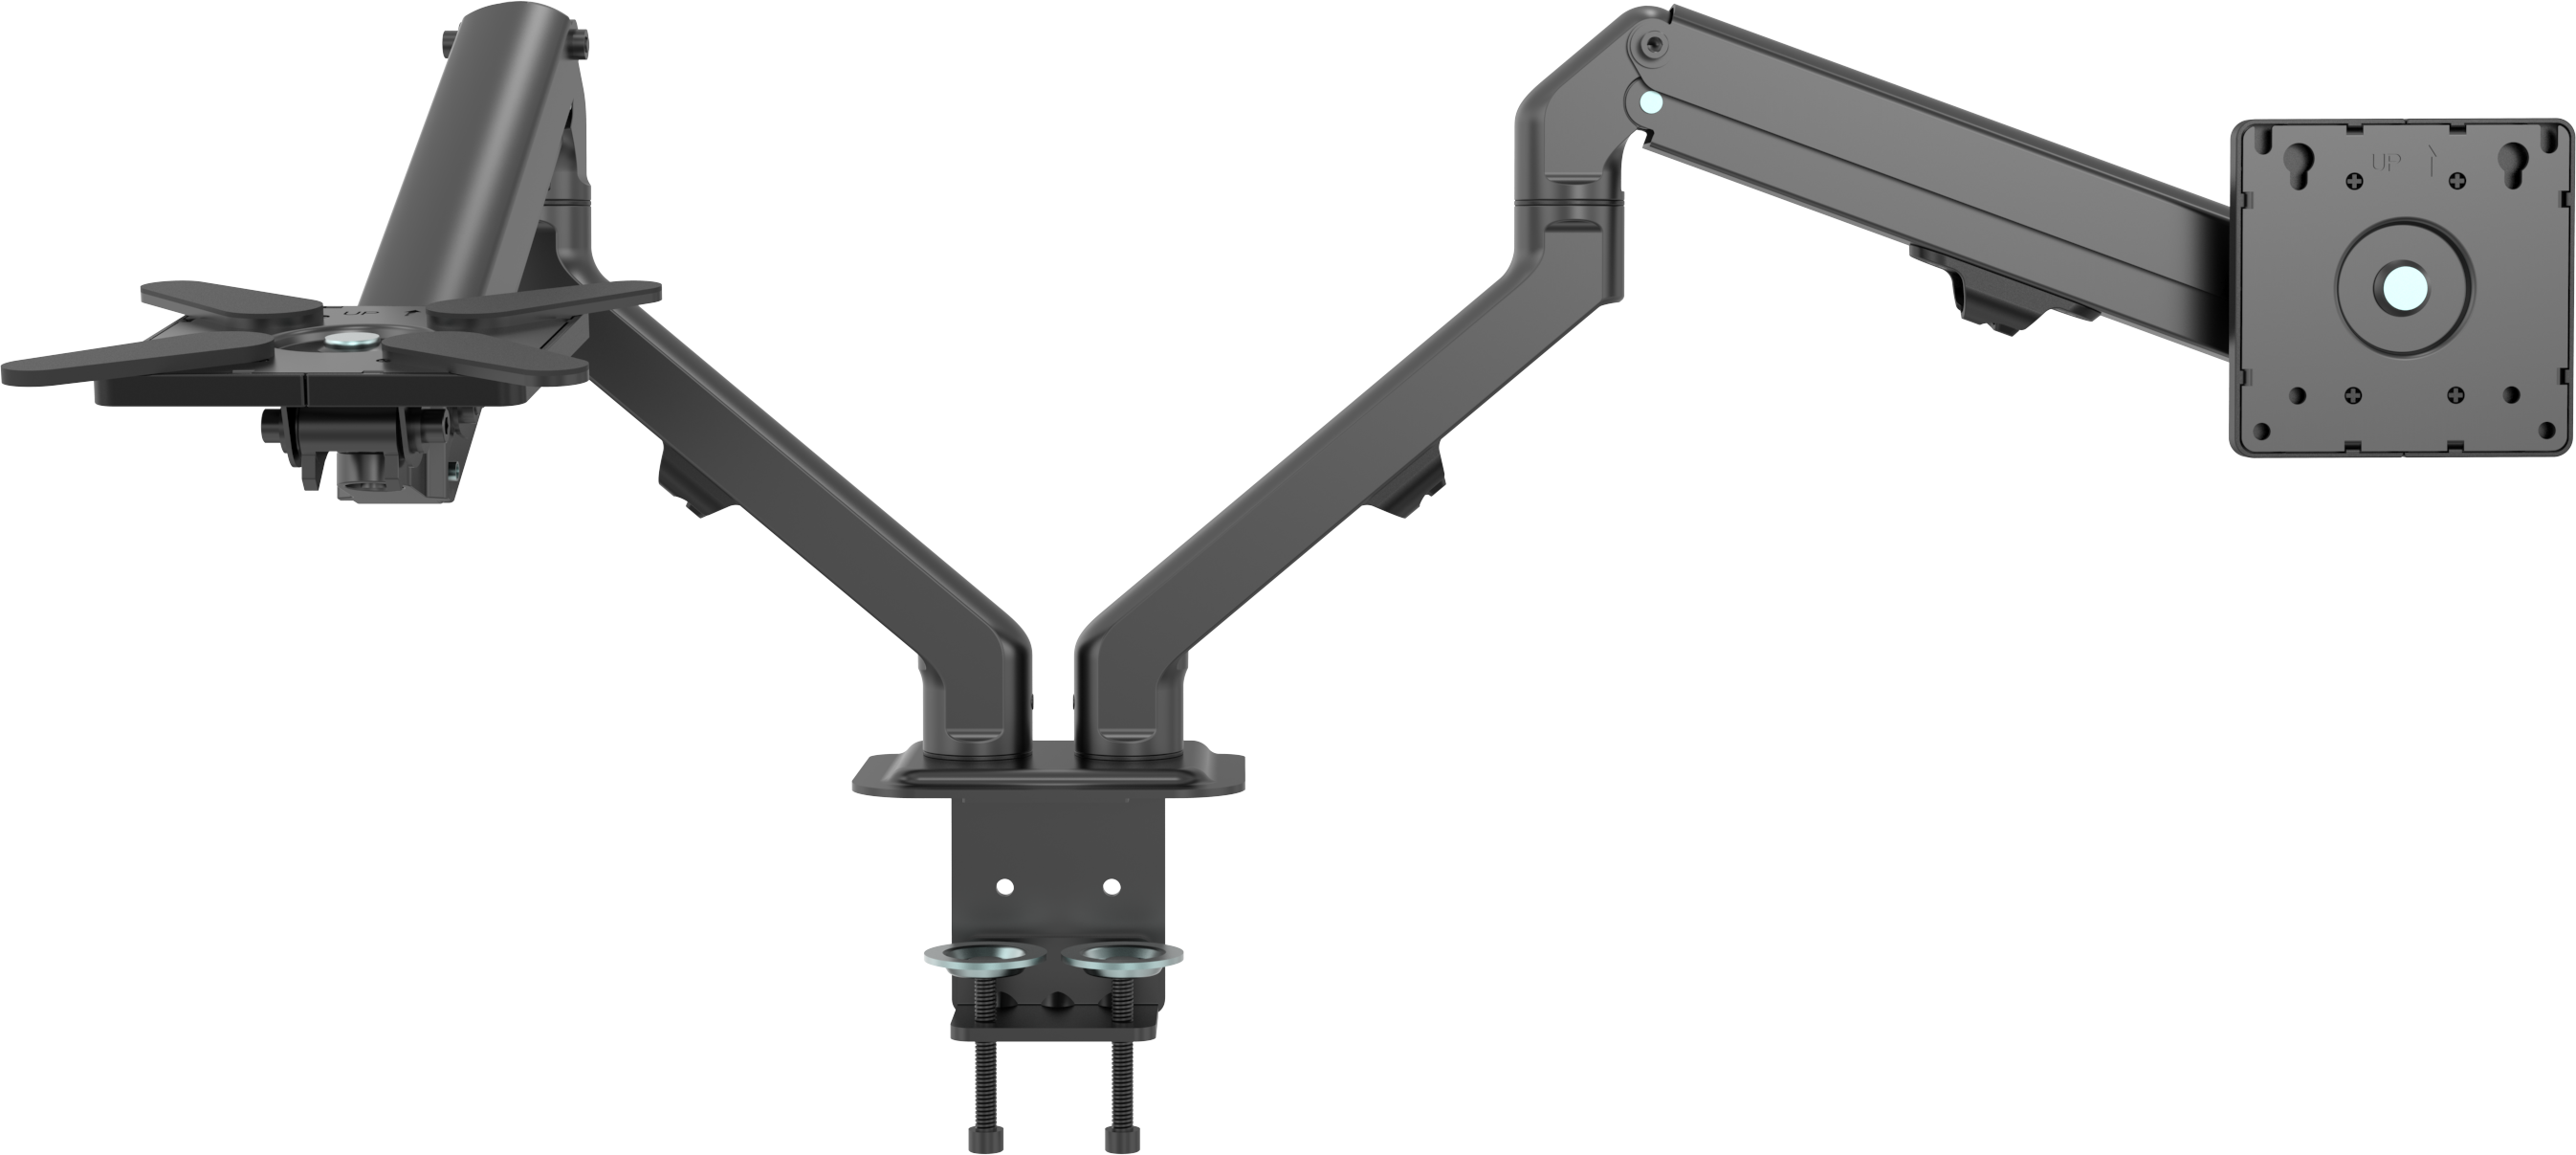 An image showing Black Monitor Desk Arm 100×100 Dual